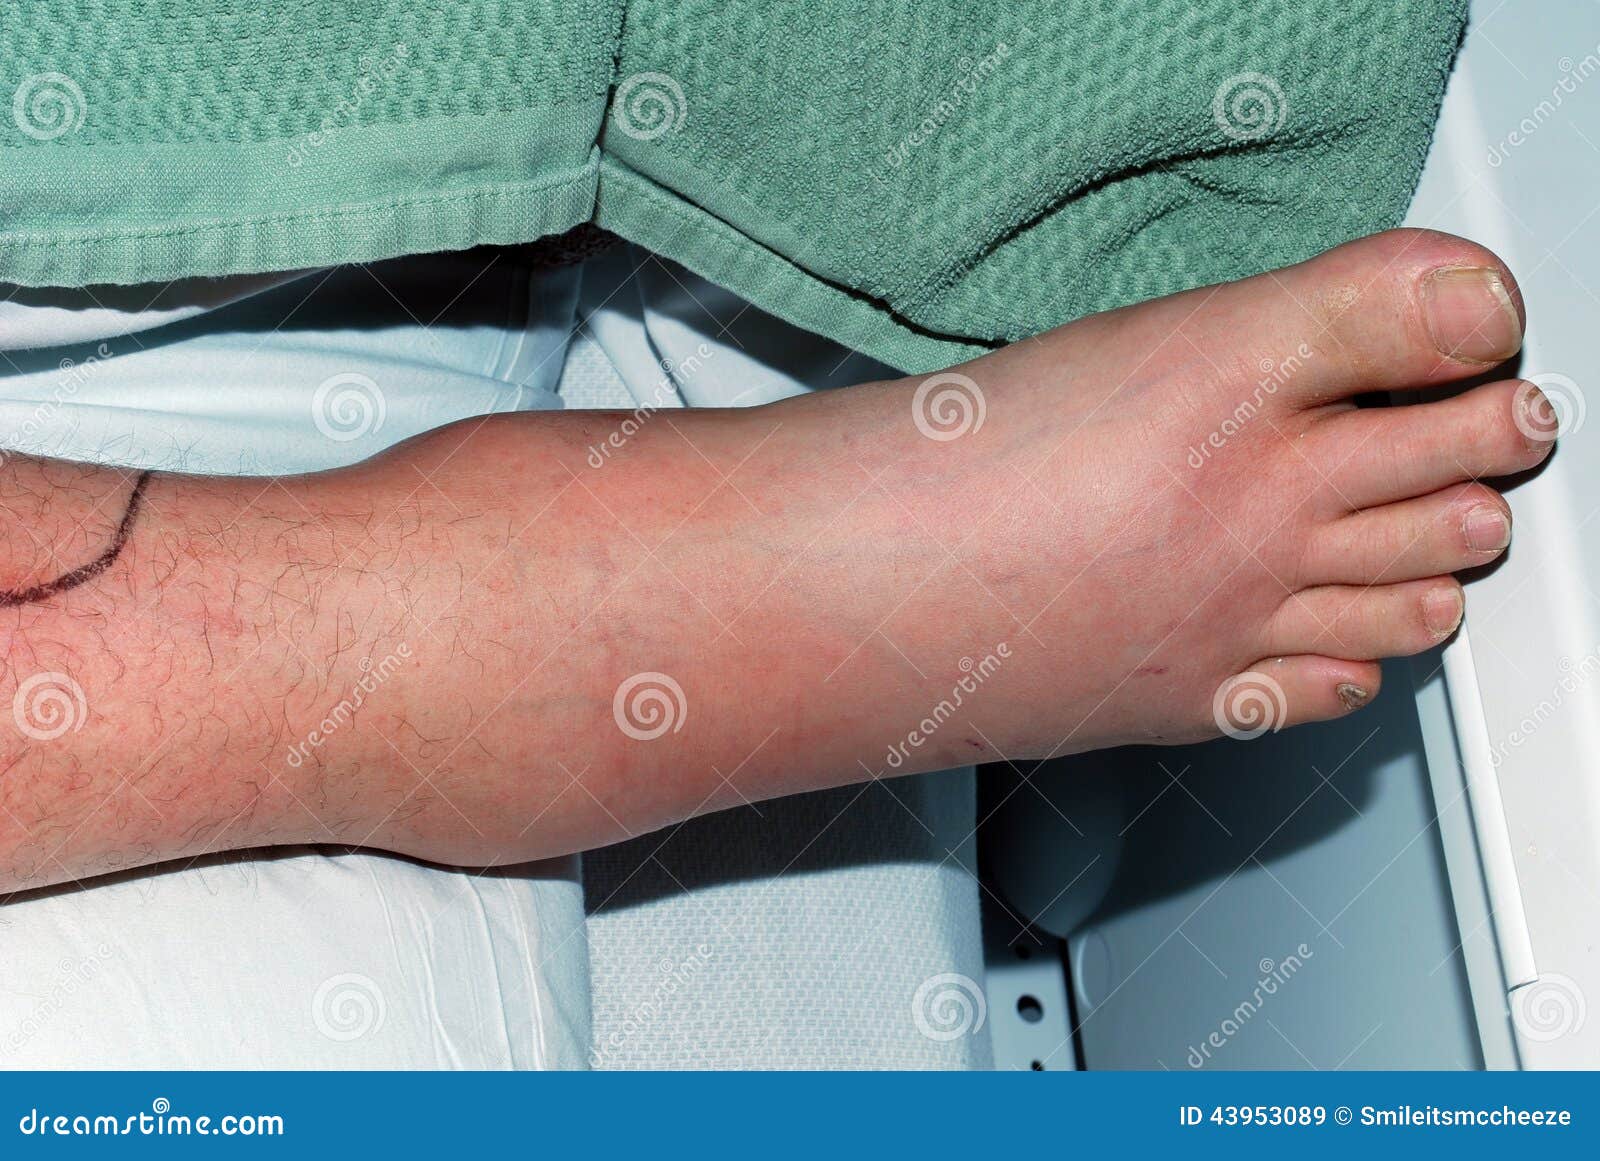 Staphylocoque Infecton image stock. Image du gonflé, malade - 43953089